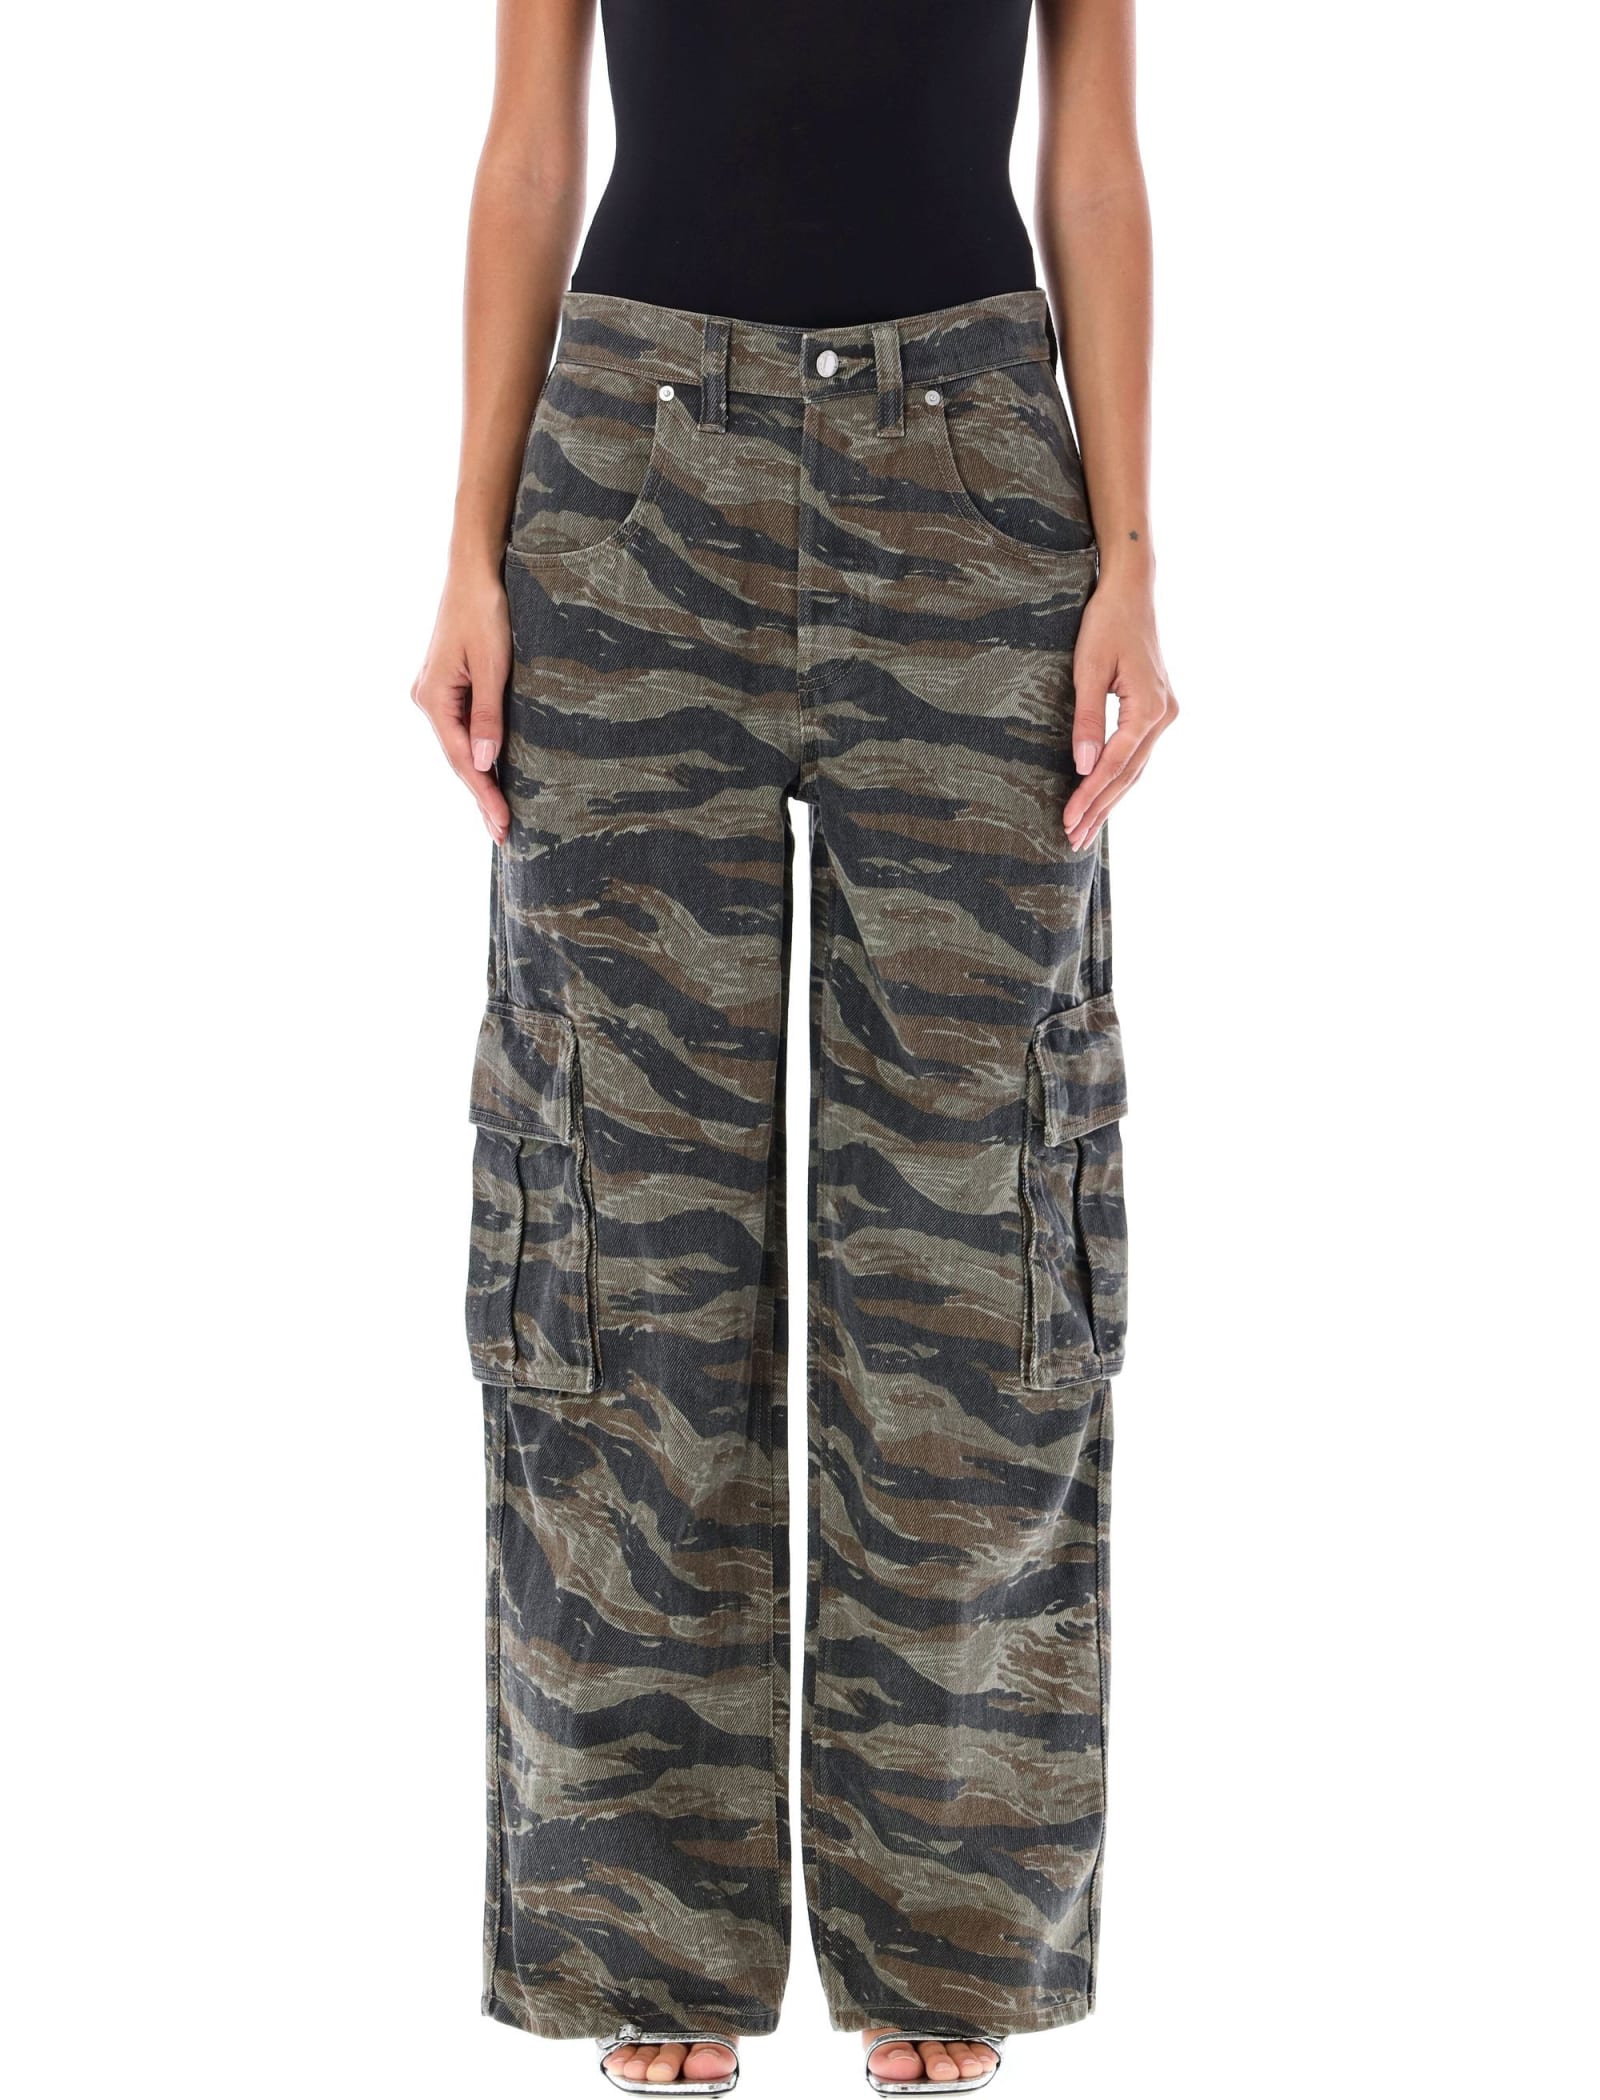 ALEXANDER WANG CAMO BAGGED OUT POCKET JEANS